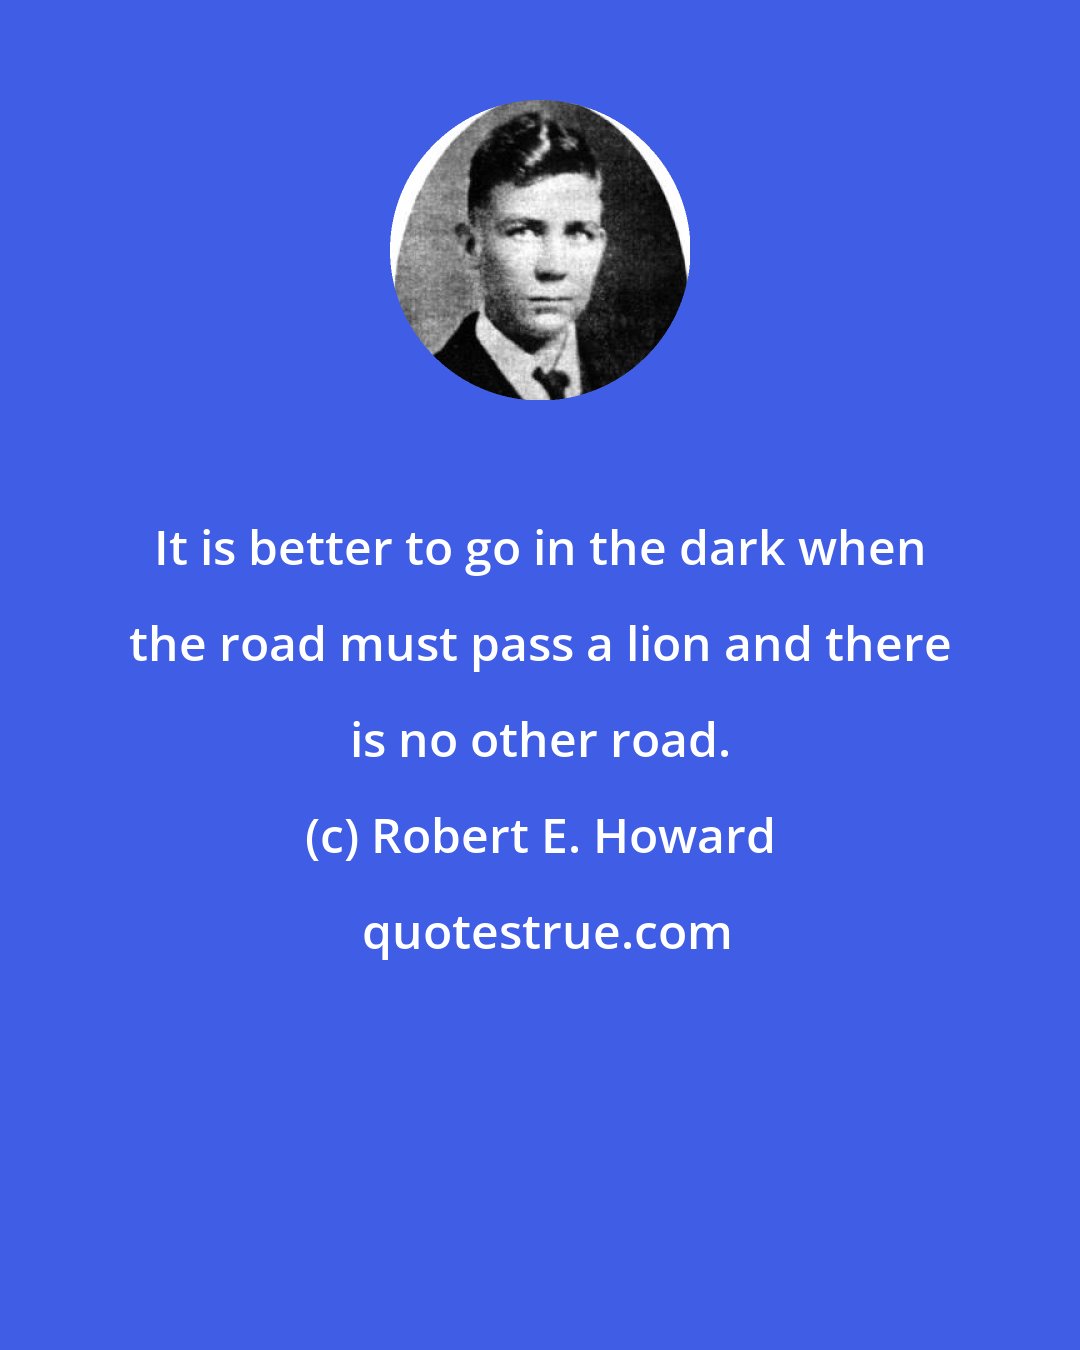 Robert E. Howard: It is better to go in the dark when the road must pass a lion and there is no other road.